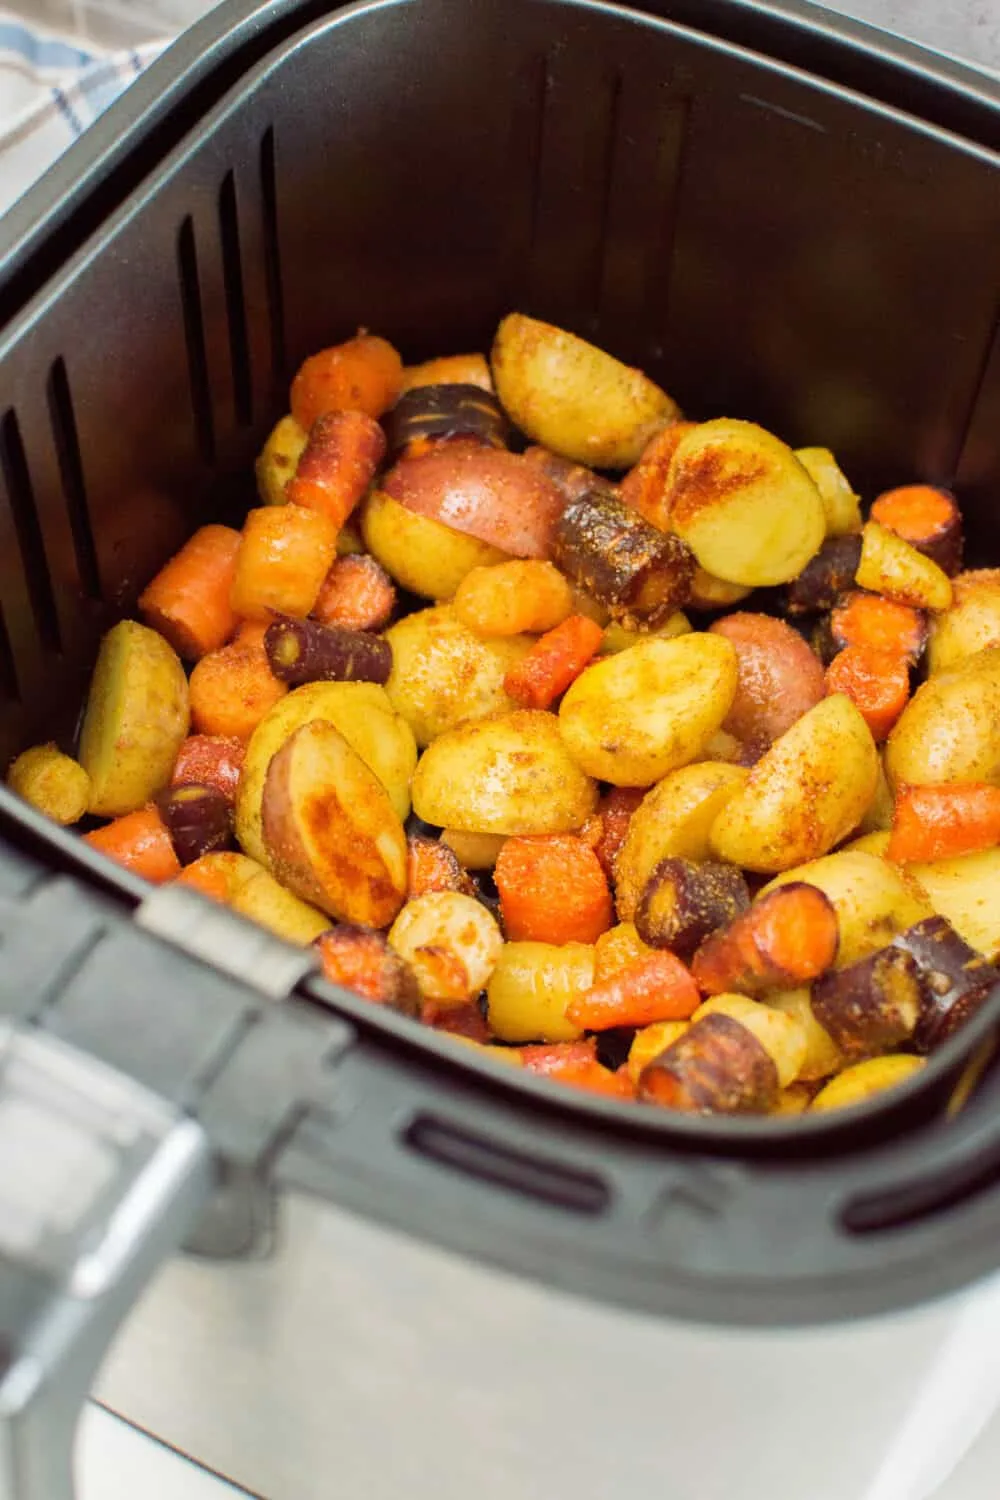 Potatoes and carrots coated with oil and seasoning, laying in an air fryer basket